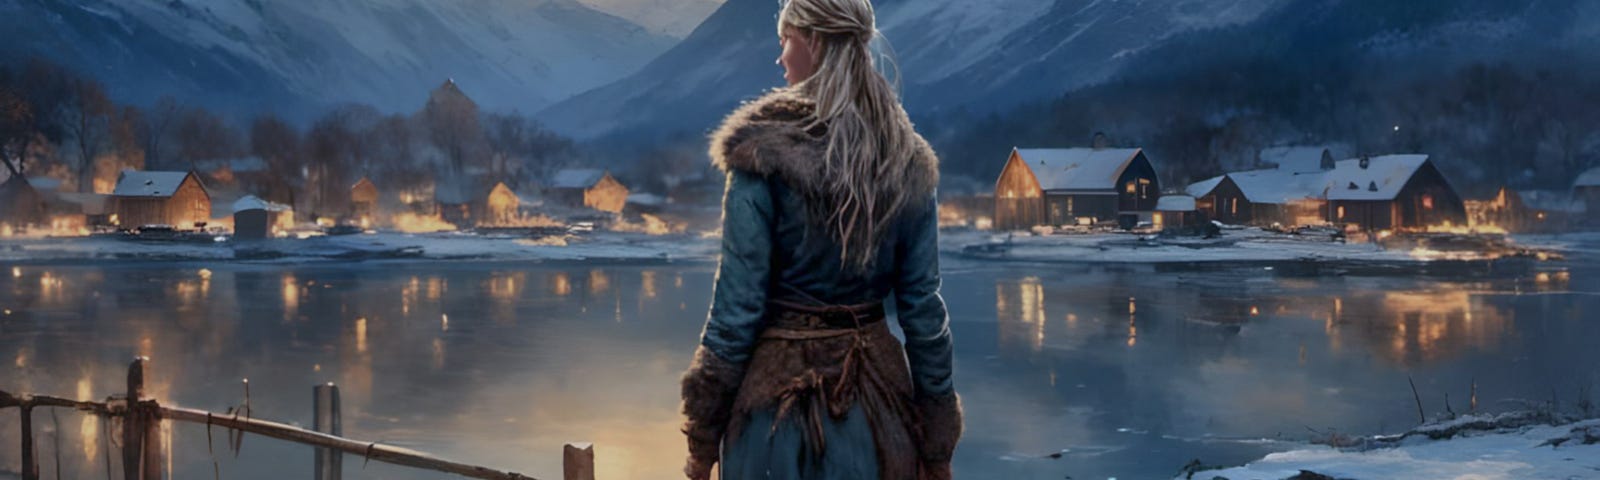 She awaits the ice and his ship.